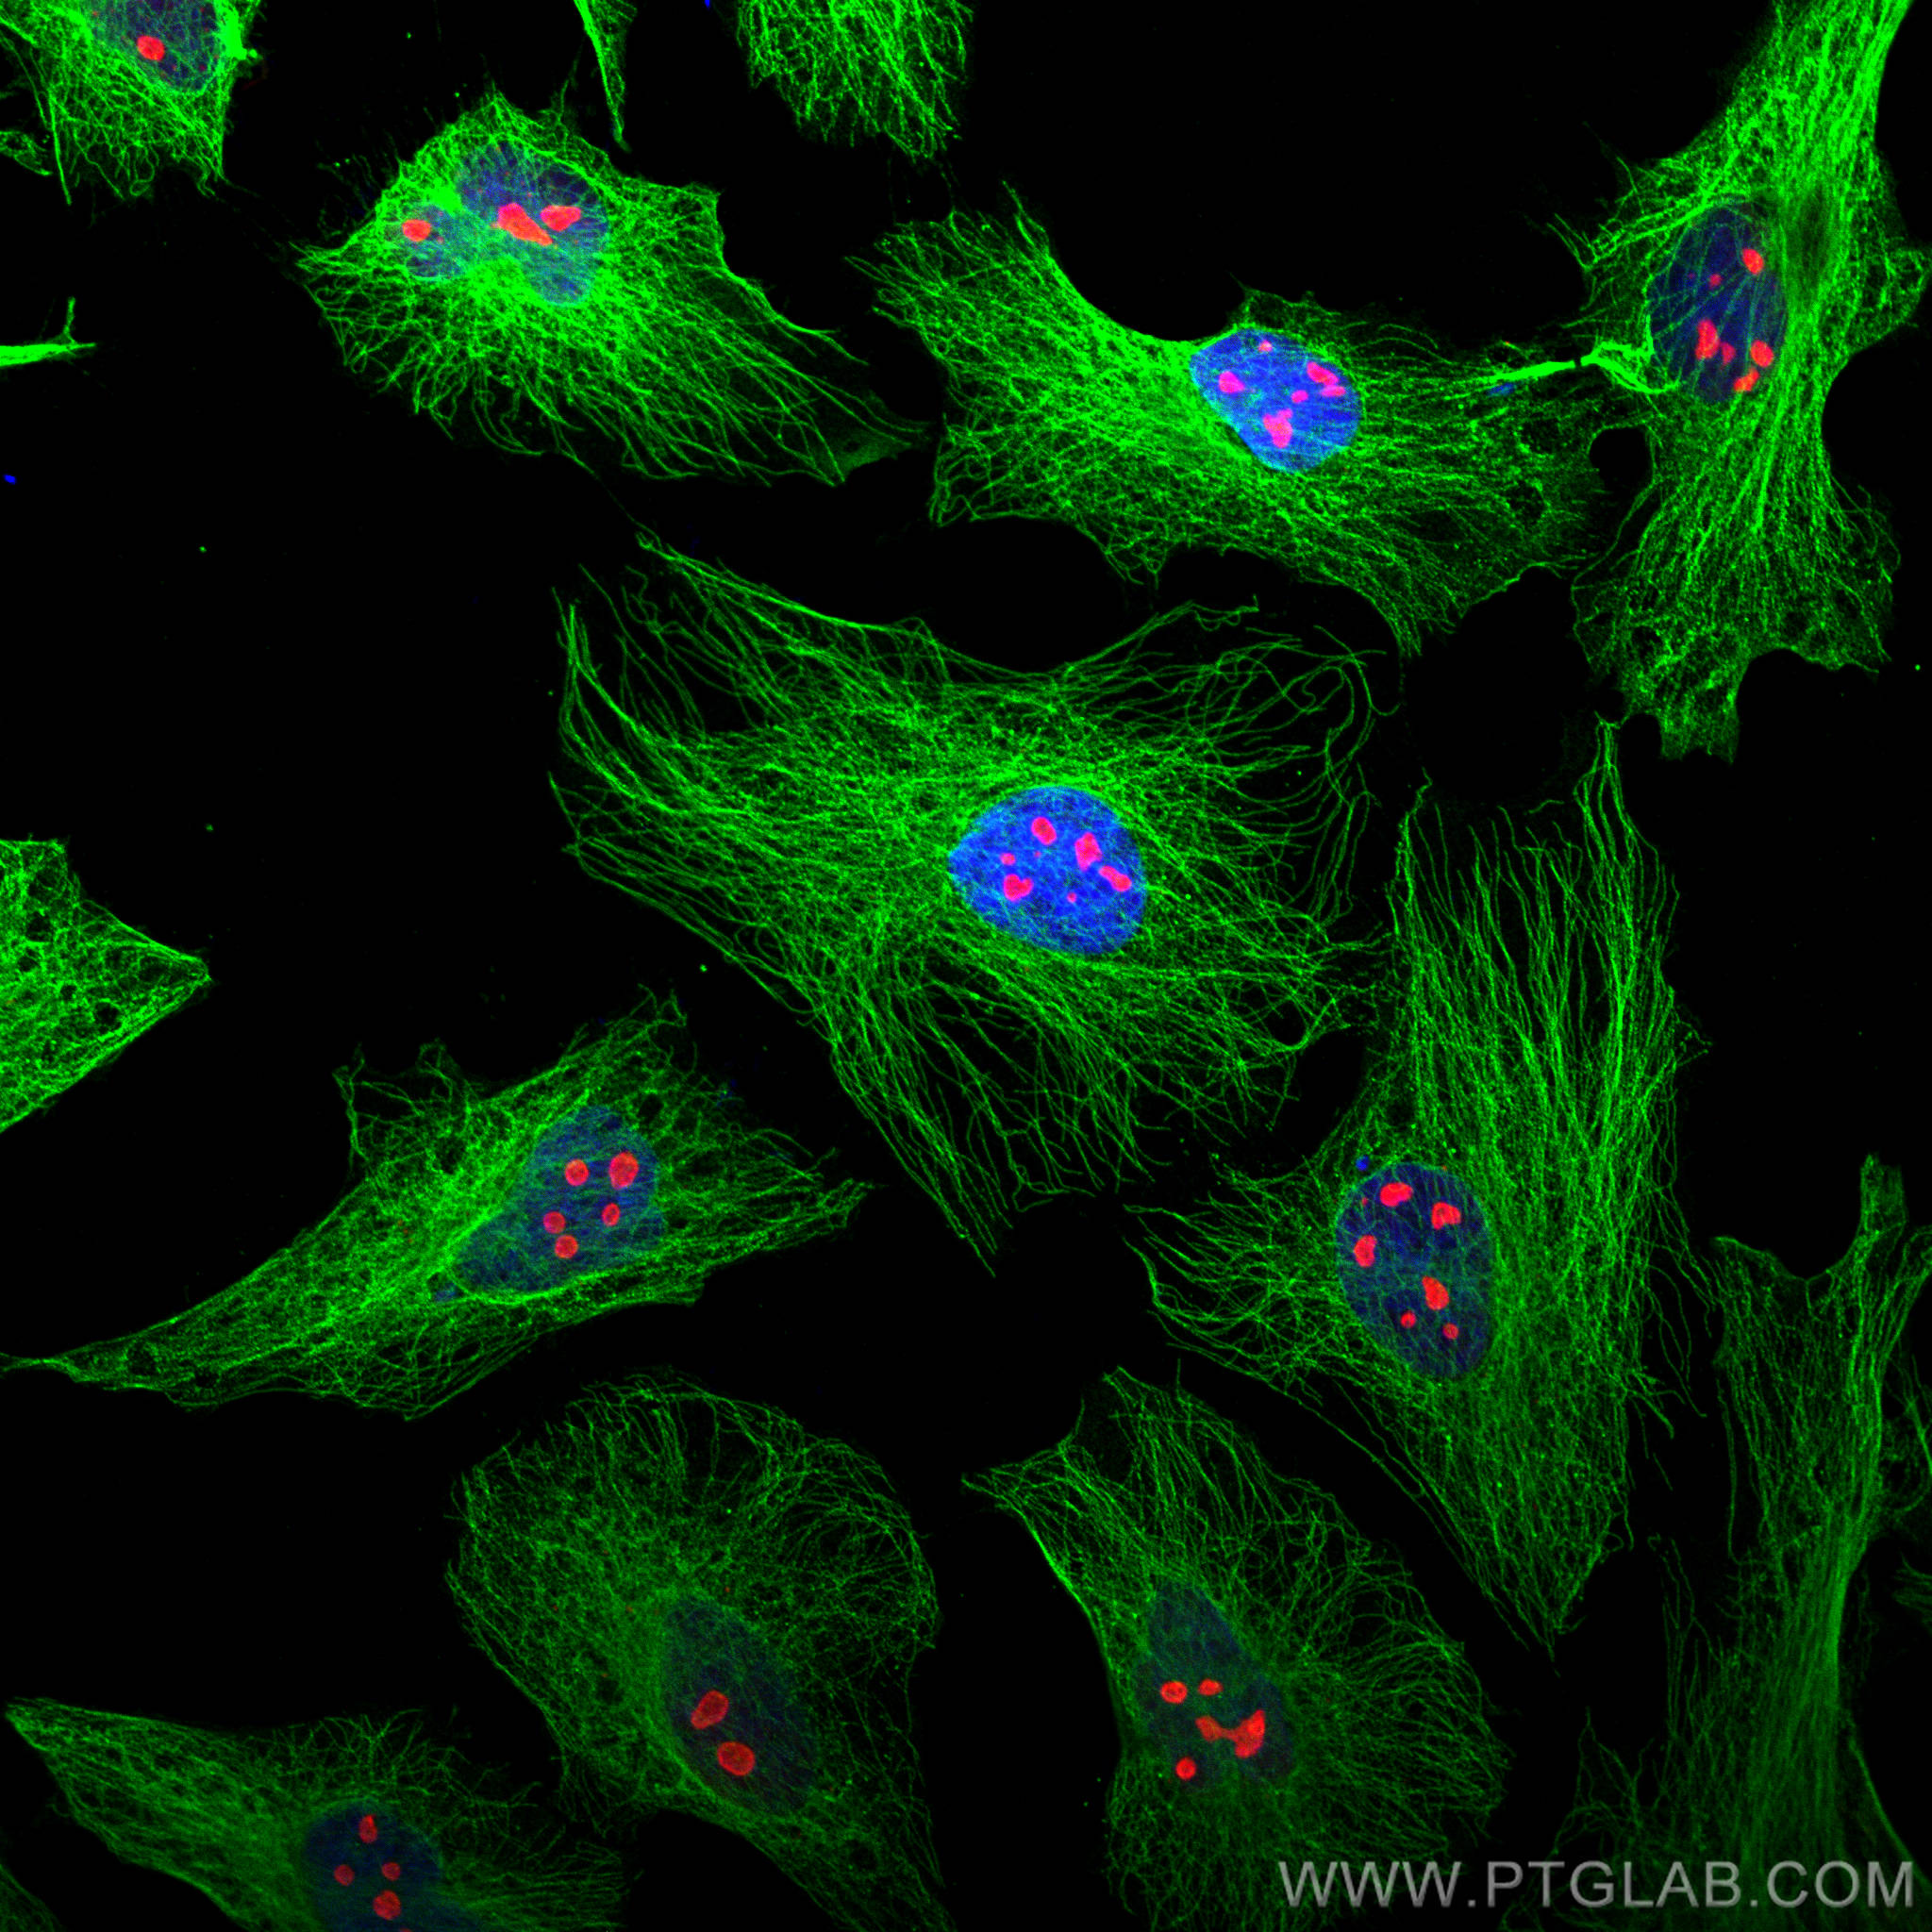 Immunofluorescence (IF) analysis of Hela cells stained with rabbit anti-Alpha Tubulin polyclonal antibody (11224-1-AP, green) and mouse anti-NPM1 monoclonal antibody (60096-1-Ig, red). Multi-rAb CoraLite® Plus 488-Goat Anti-Rabbit Recombinant Secondary Antibody (H+L) (RGAR002, 1:500) and Multi-rAb CoraLite® Plus 594-Goat Anti-Mouse Recombinant Secondary Antibody (H+L) (RGAM004, 1:500) were used for detection. 